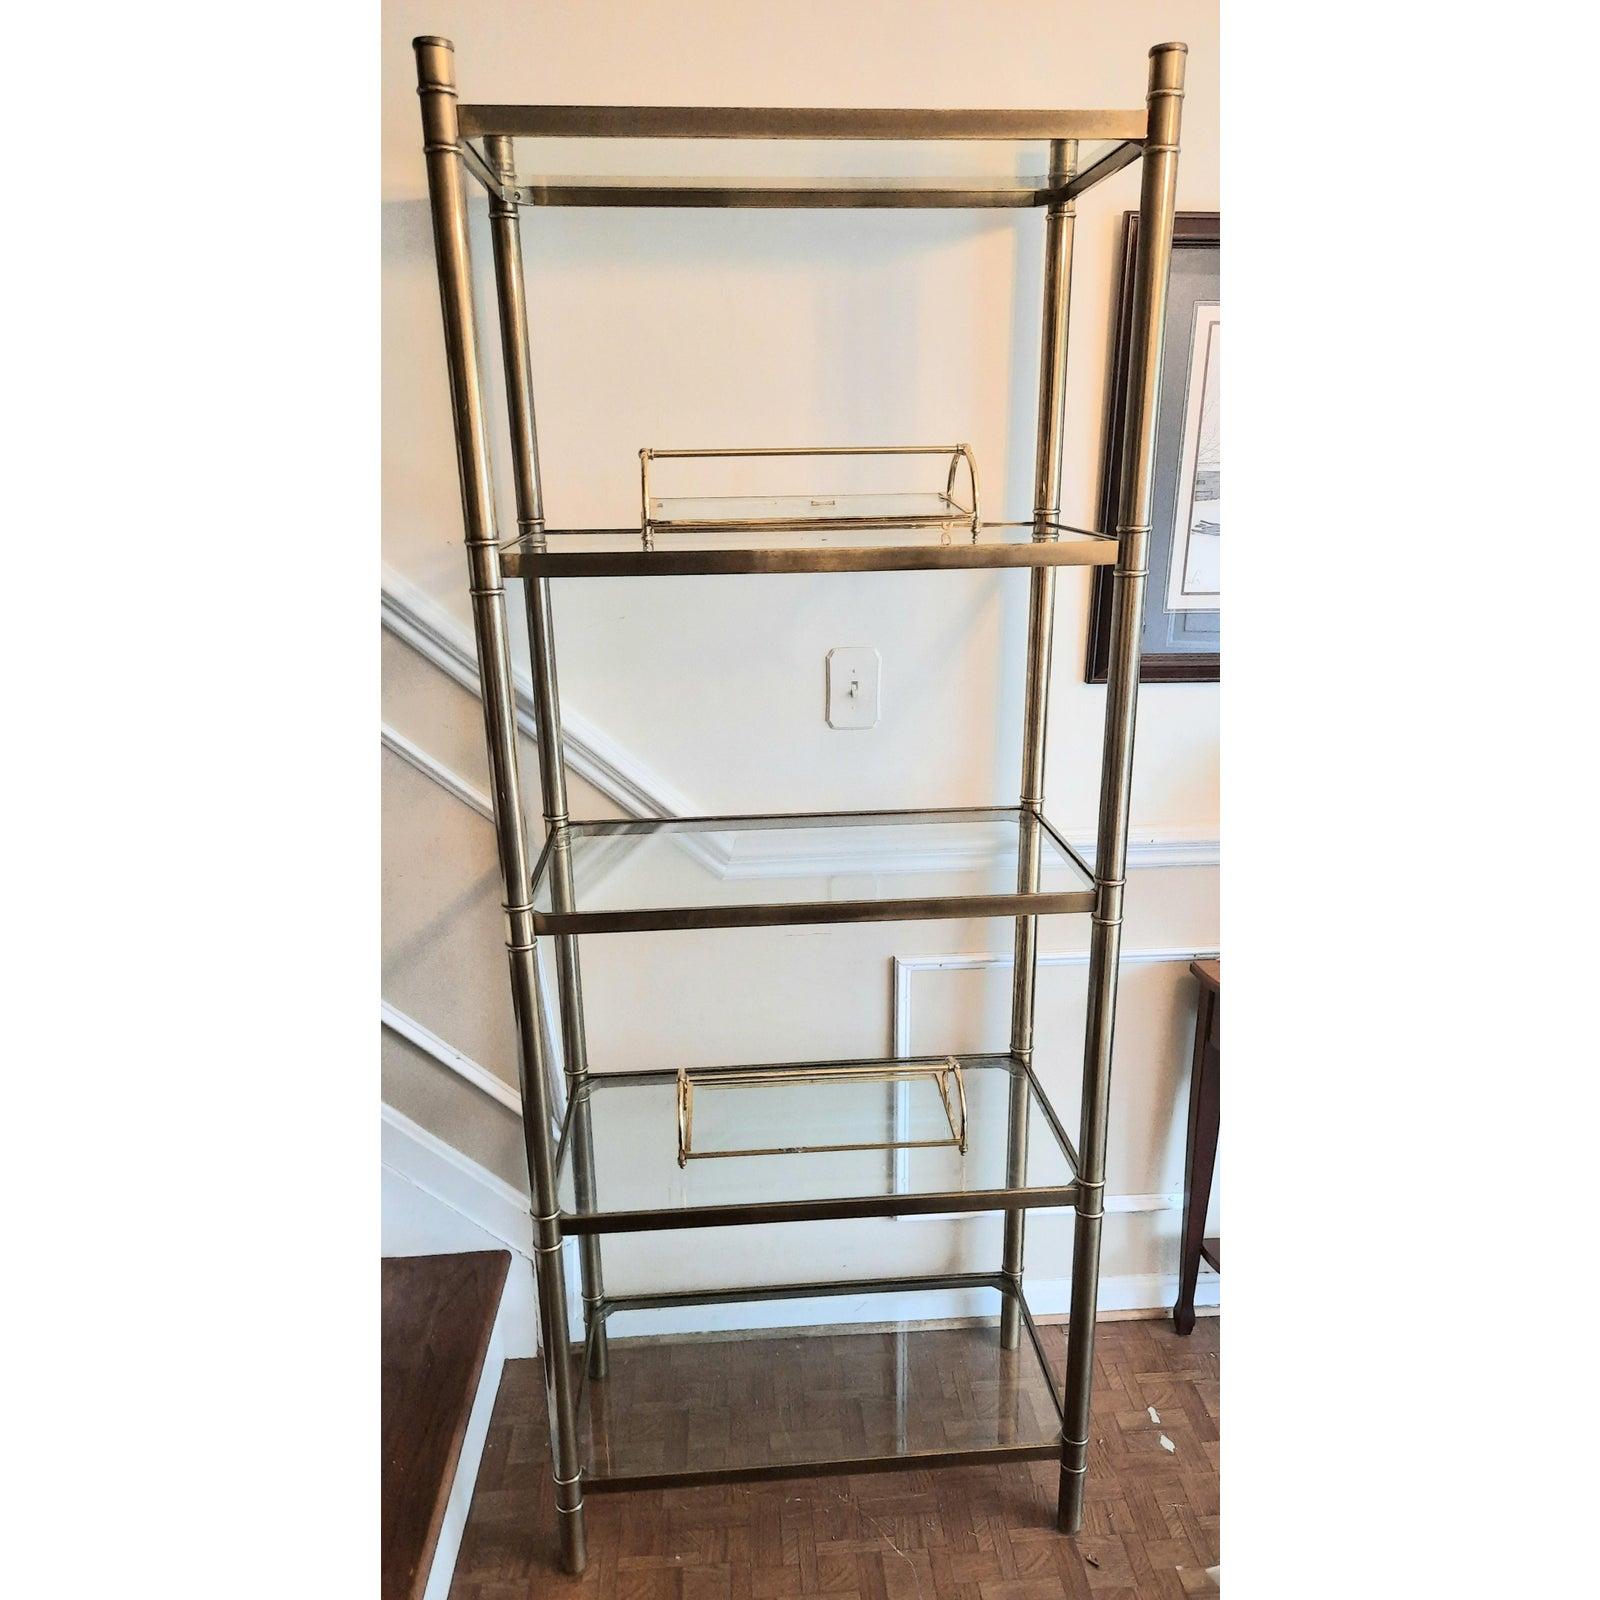 Mid-Century Modern heavy brass etagere bookshelf, display shelf. Real solid brass (130lbs) in excellent condition. 5 glass shelves.
Measures: 38W x 18D x 80H.
 